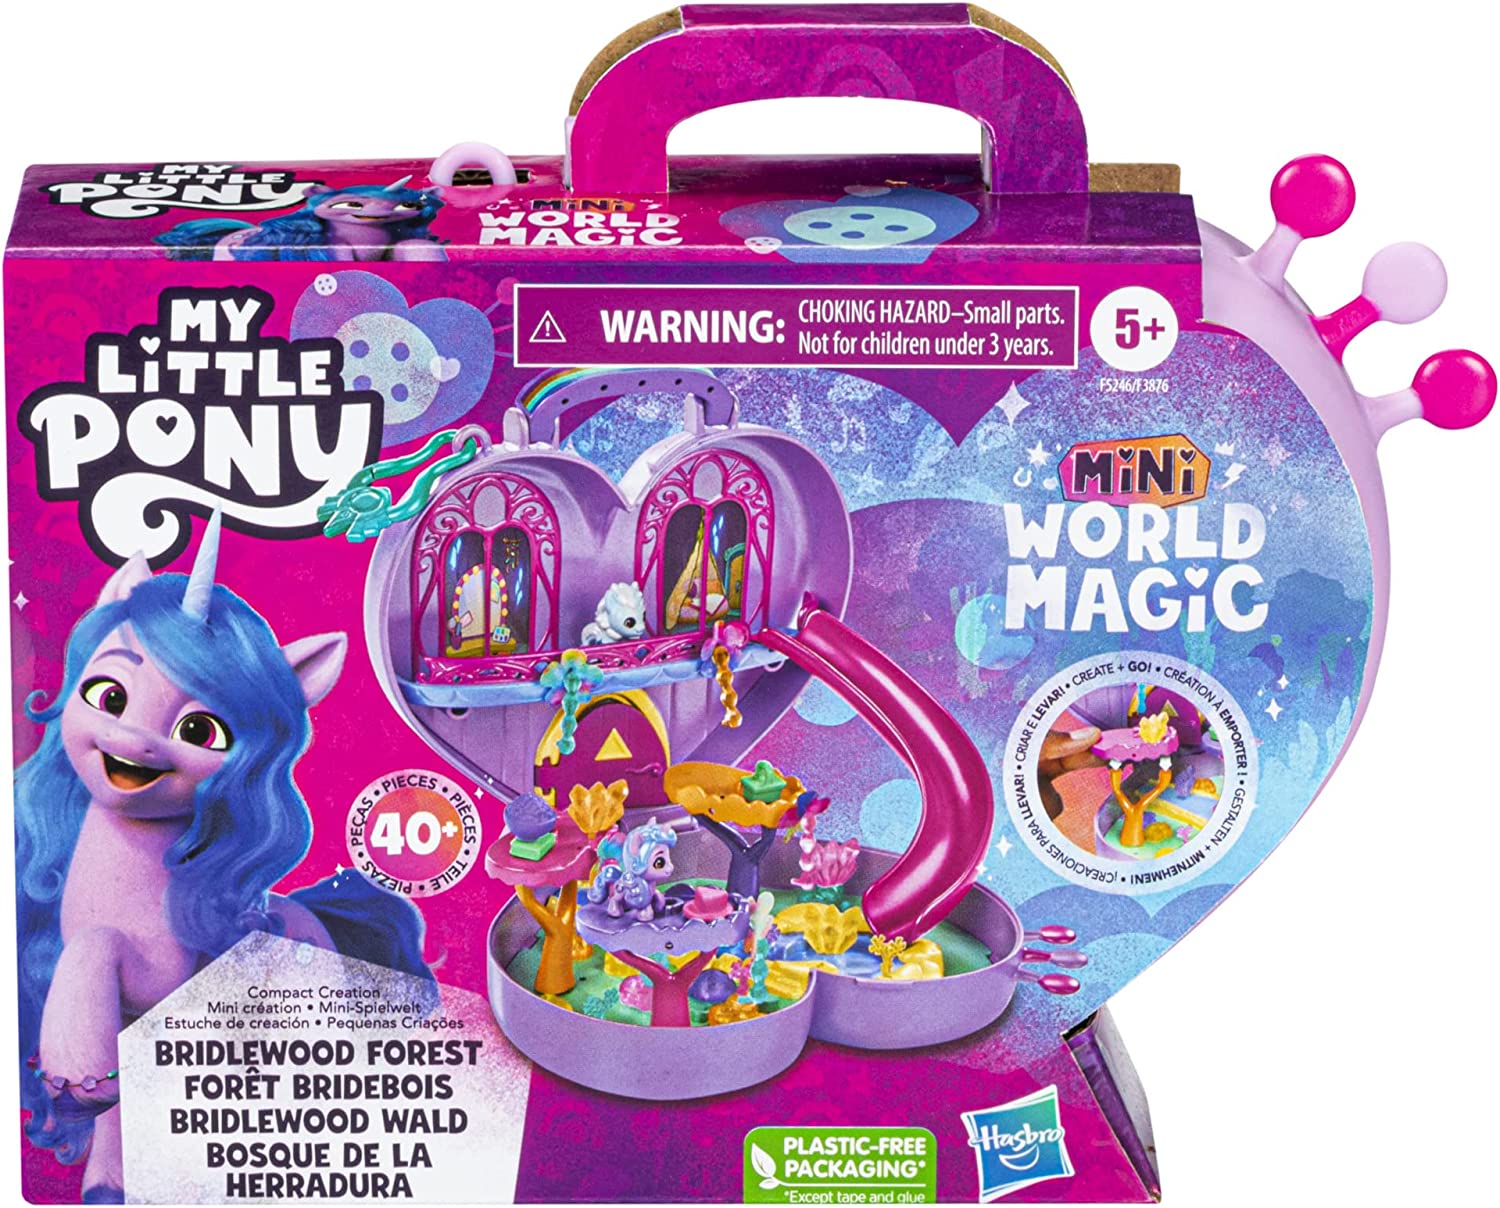 MLP: ANG Mini World Magic Compact Creation Bridlewood Forest Play Set 1